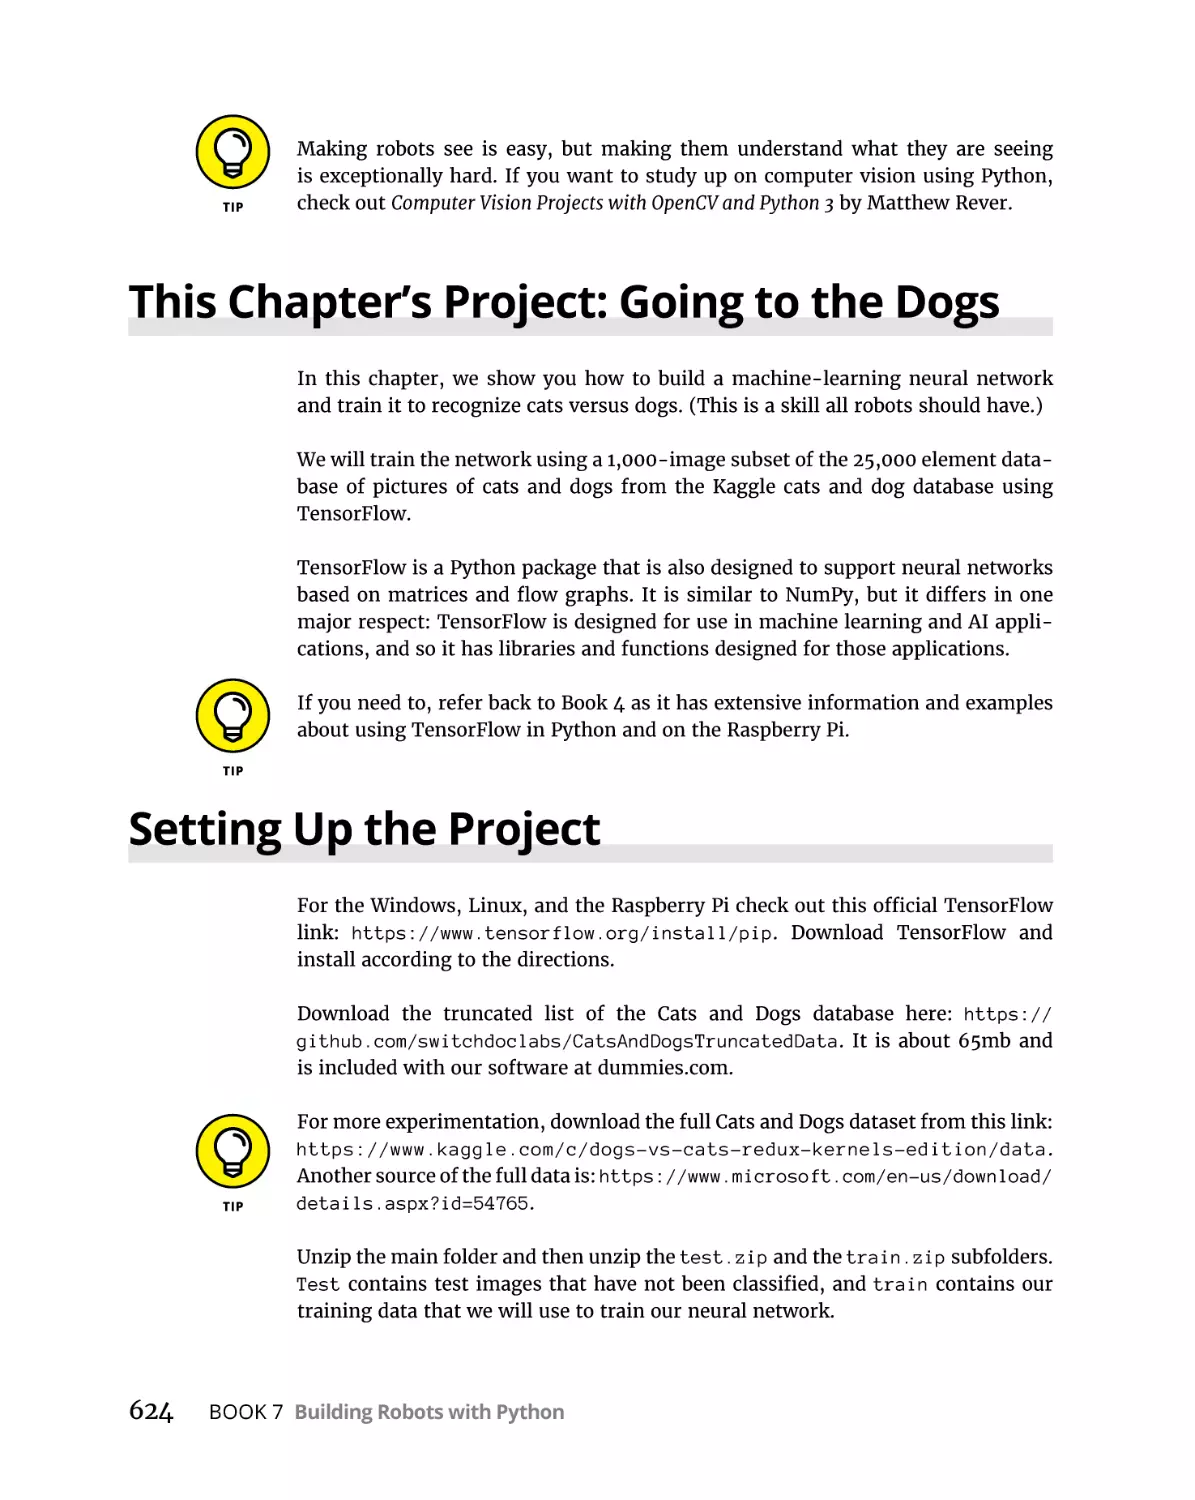 This Chapter’s Project
Setting Up the Project